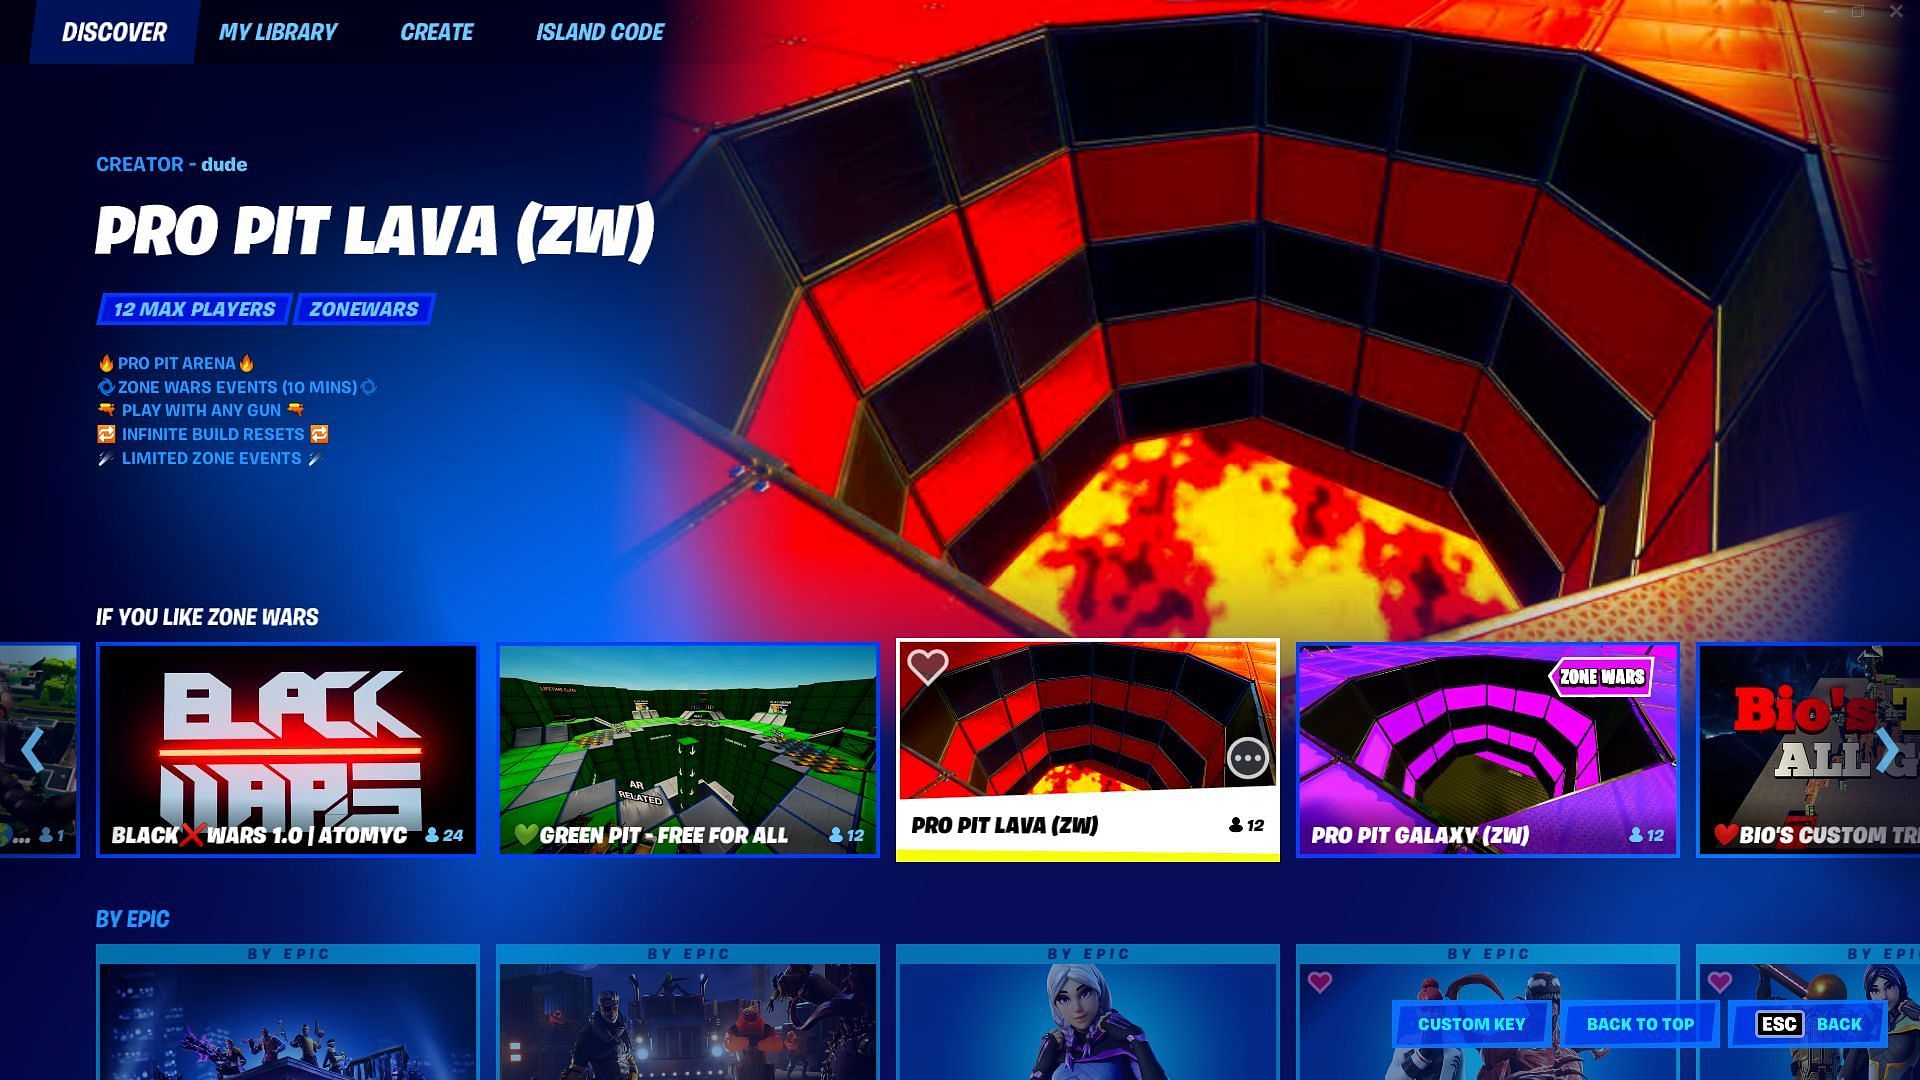 The Fortnite Discovery tab is due to an intervention (Image via Fortnite/Epic Games)